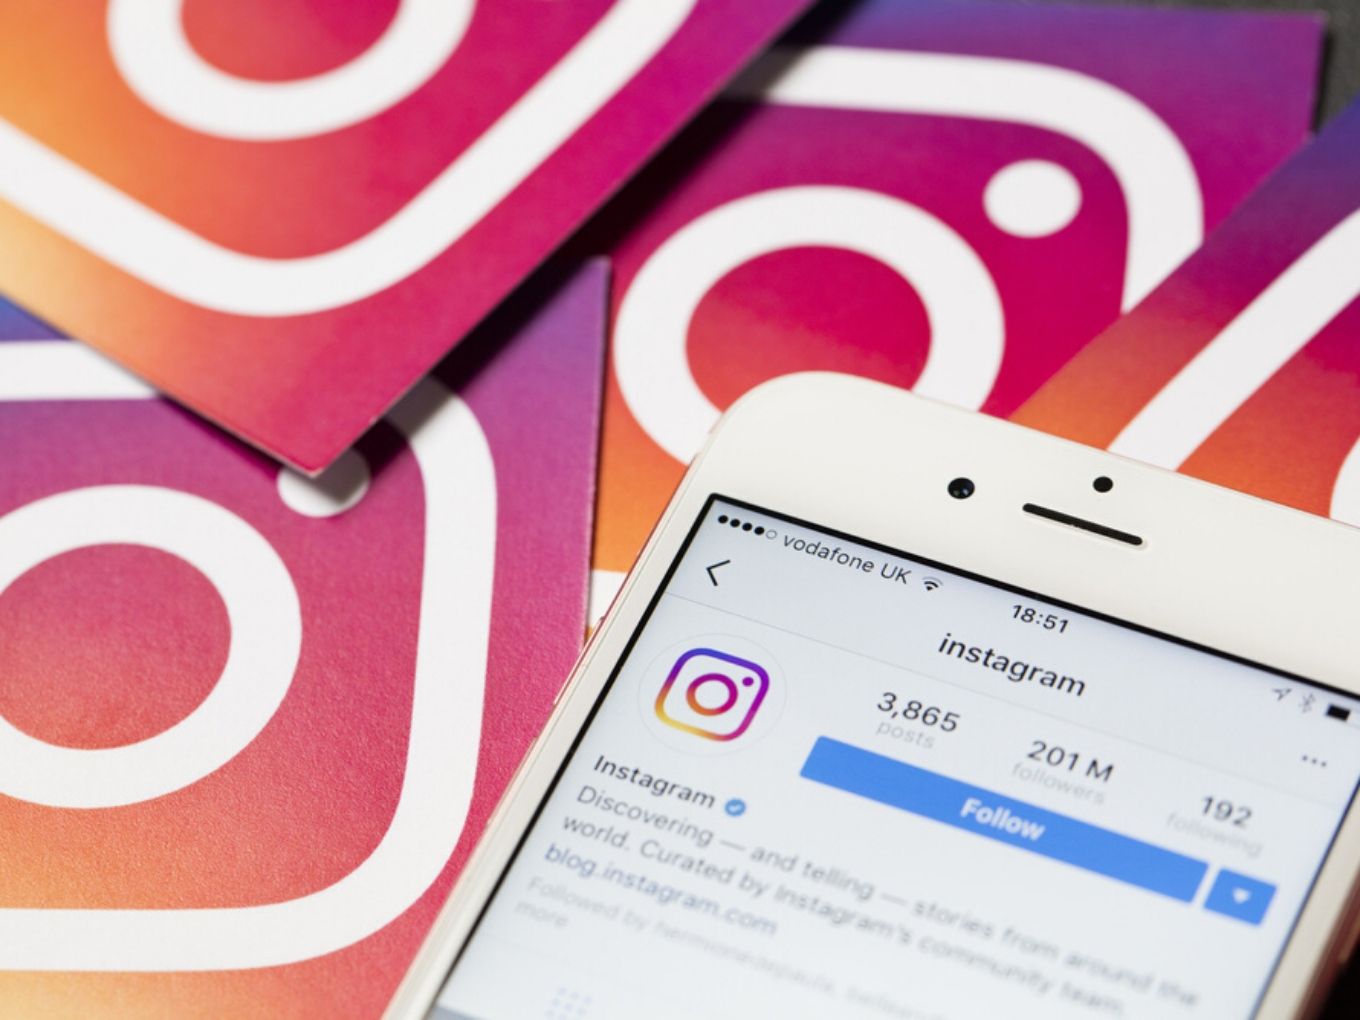 No More Fake News On Instagram With New Fact-Checking Feature